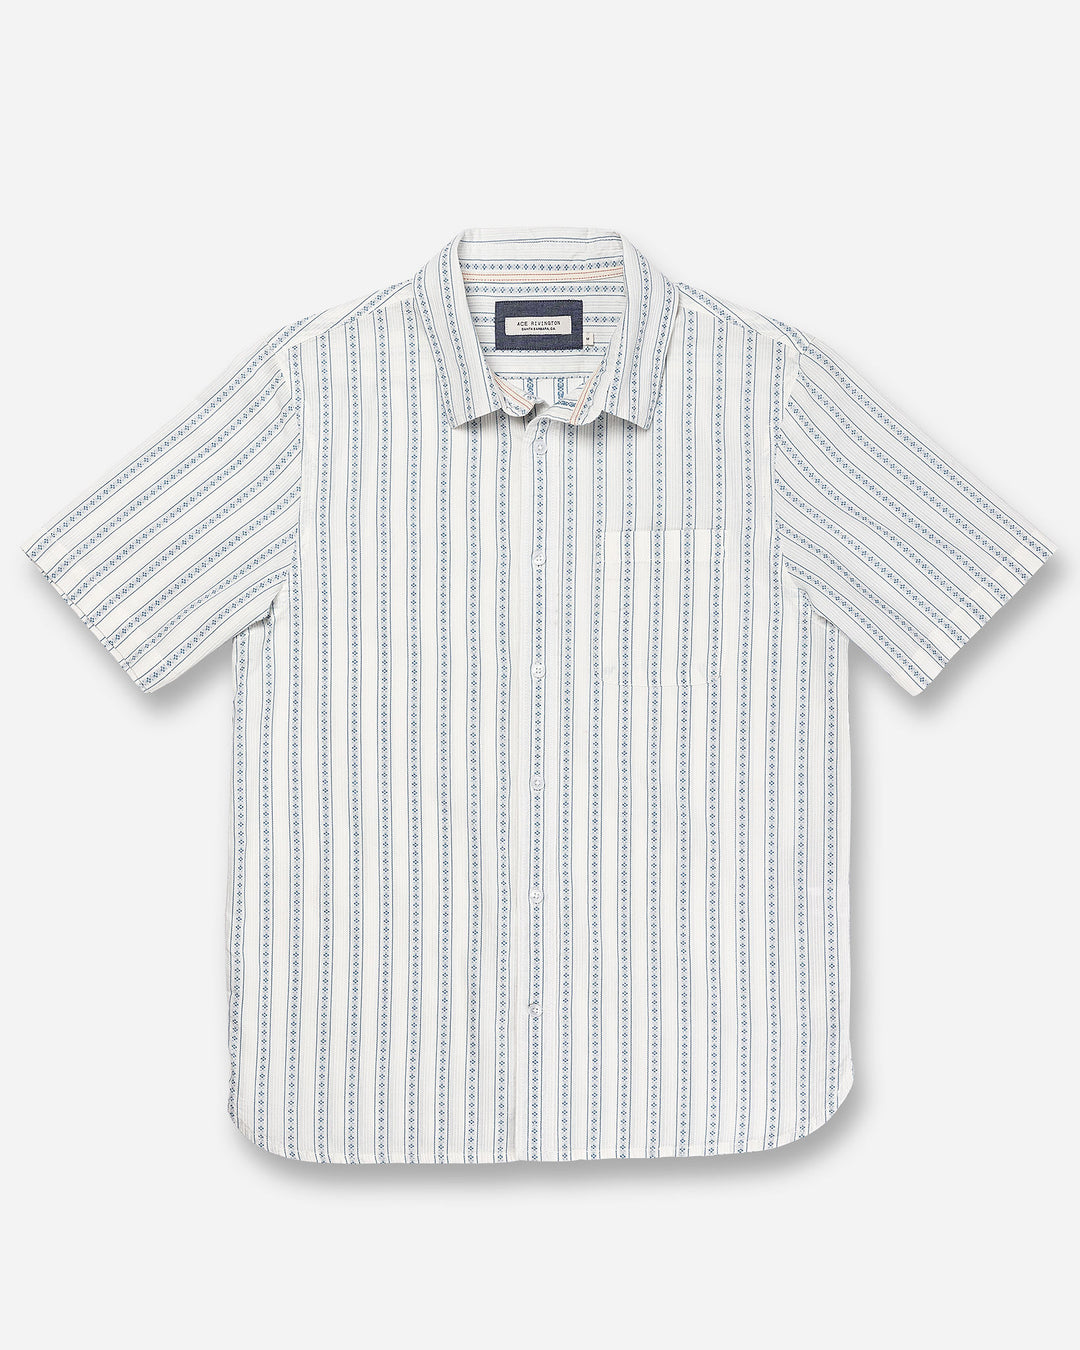 Front of flat lat of Ace rivington light-weight tailored shirt in off-white with light blue vertical stripes and dark blue diamond pattern within each stripe with pearl buttons and left-breast pocket